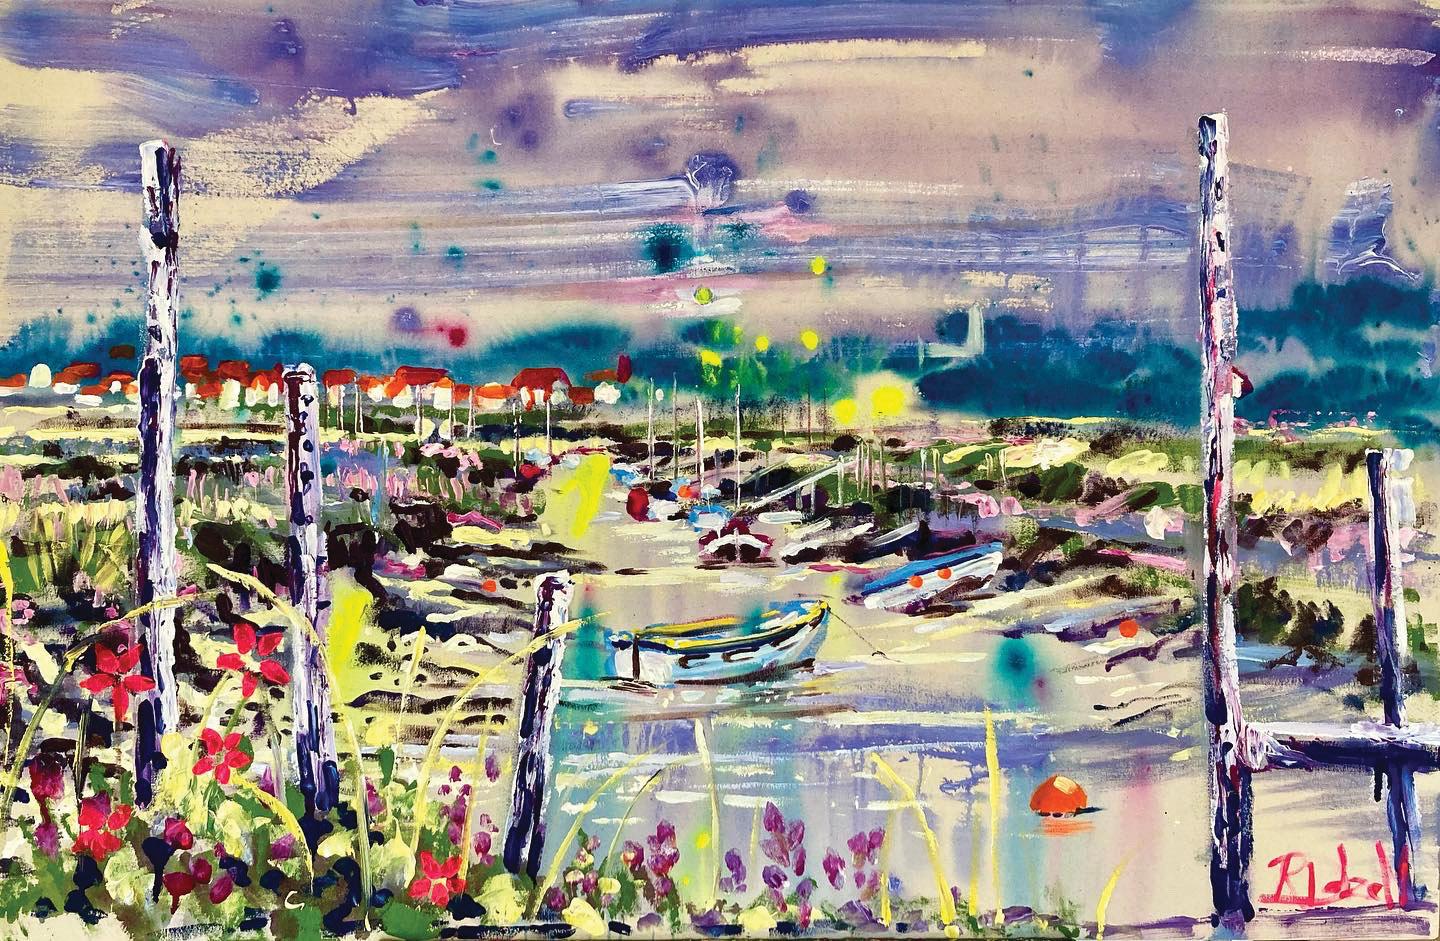 Inspired by the marshes and churches on the north Norfolk coast.  Based on the view along Morston creek to Blakeney in the distance.

Rachael Dalzell’s paintings are colourful and expressive.  Her free and lively use of paint through various